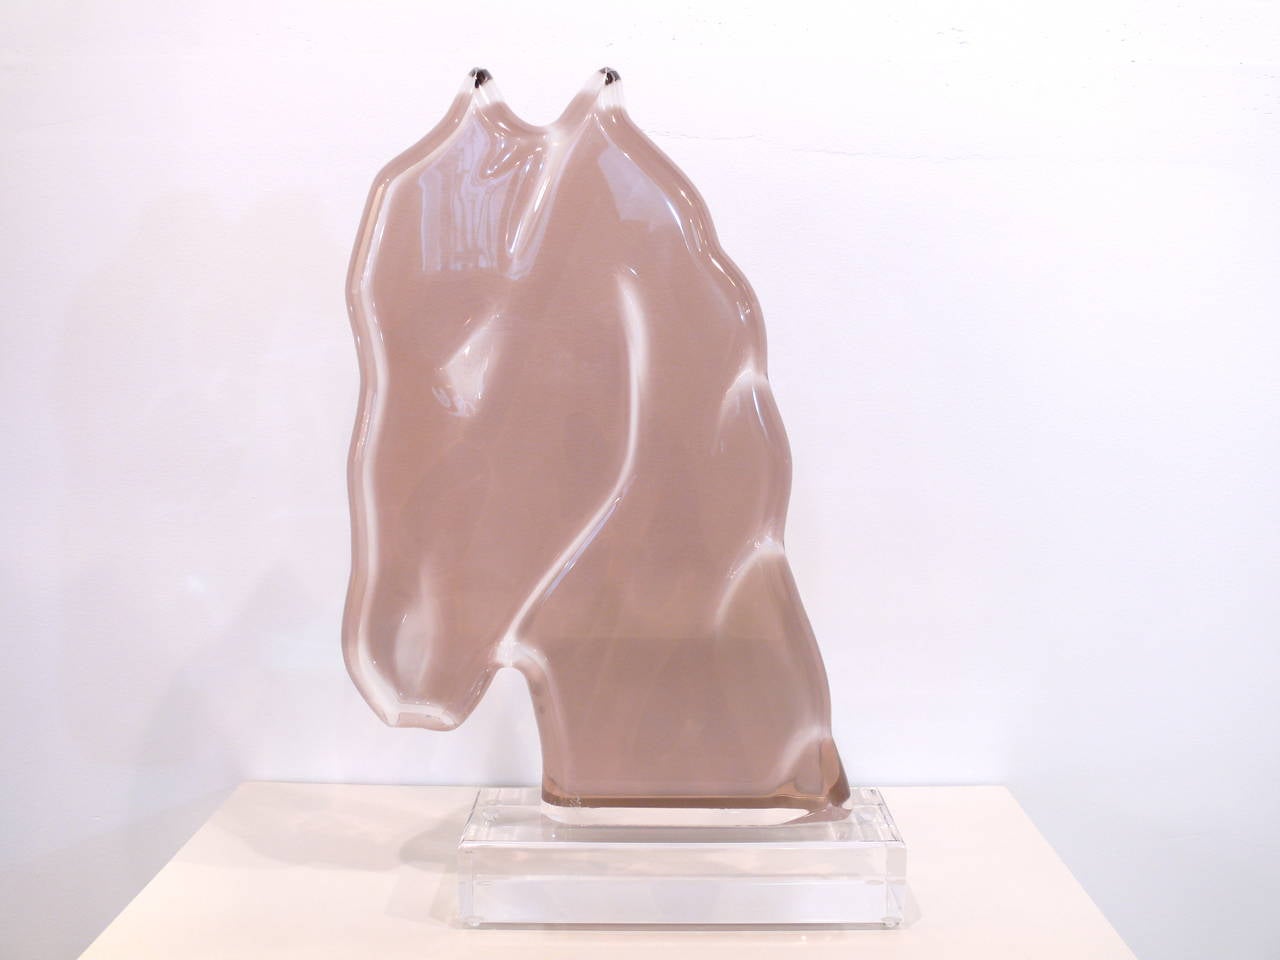 Beautiful smoked lucite horsehead sculpture with rounded edges atop a clear lucite base by Shlomi Haziza, circa 1993.